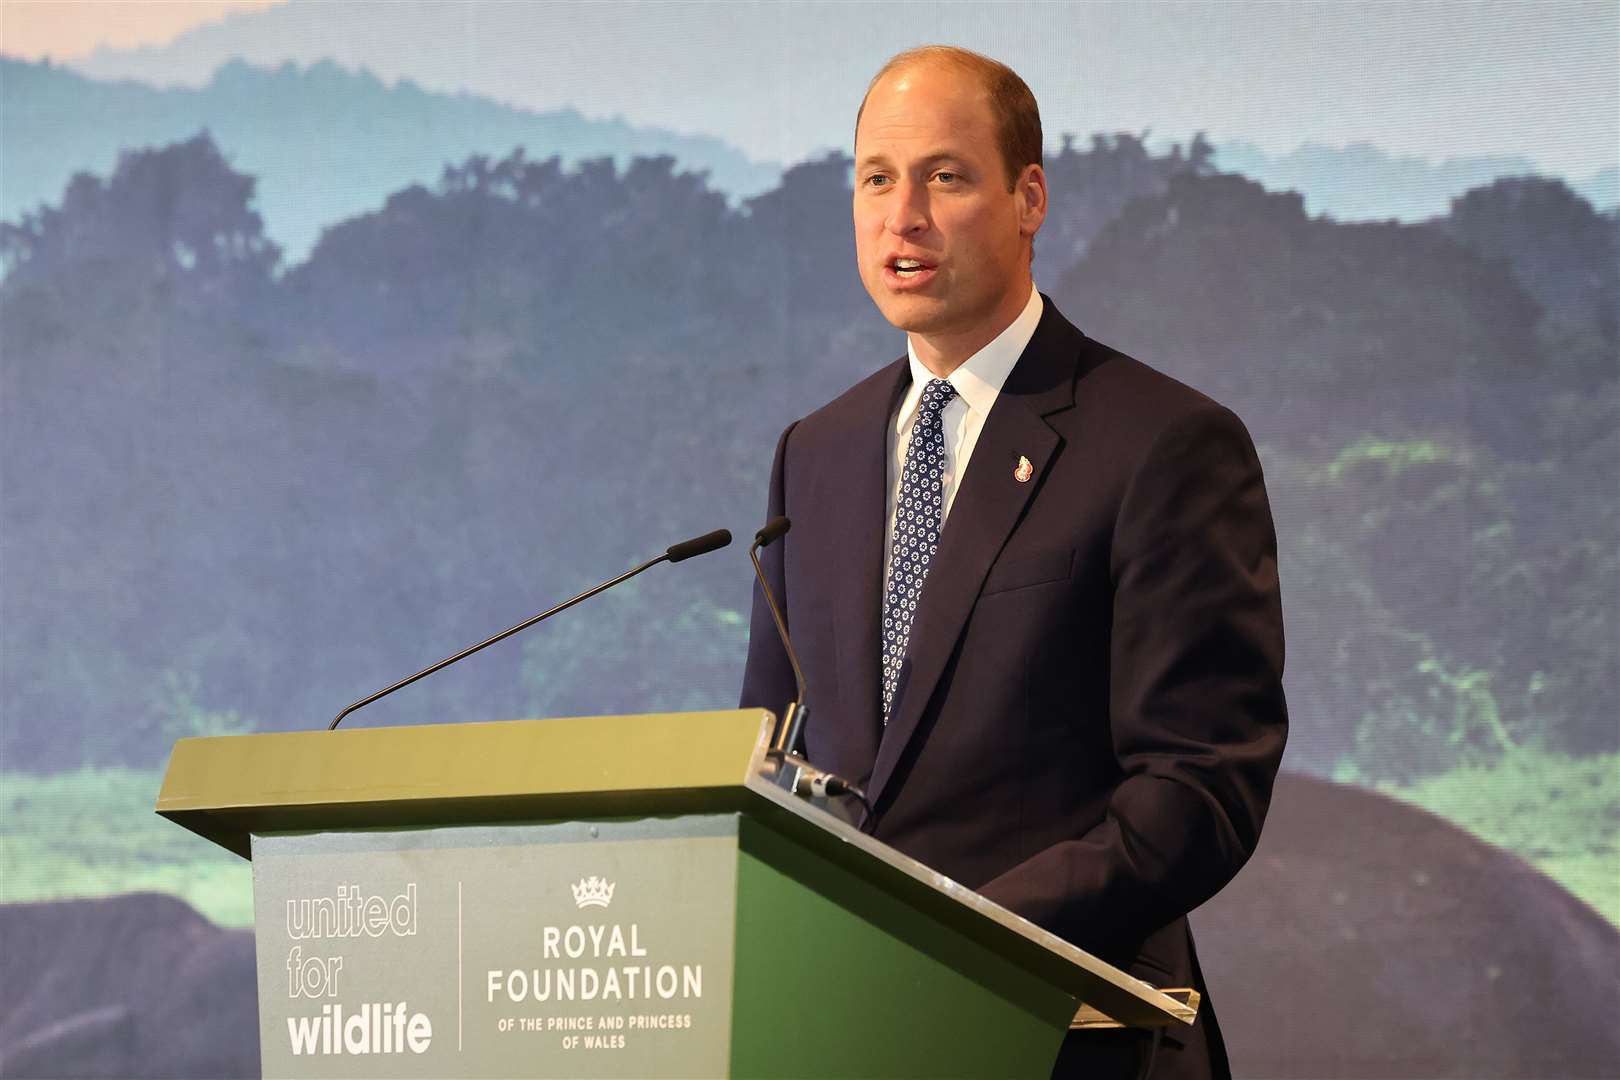 The Prince of Wales speaking at the United for Wildlife Global Summit (Chris Jackson/PA)